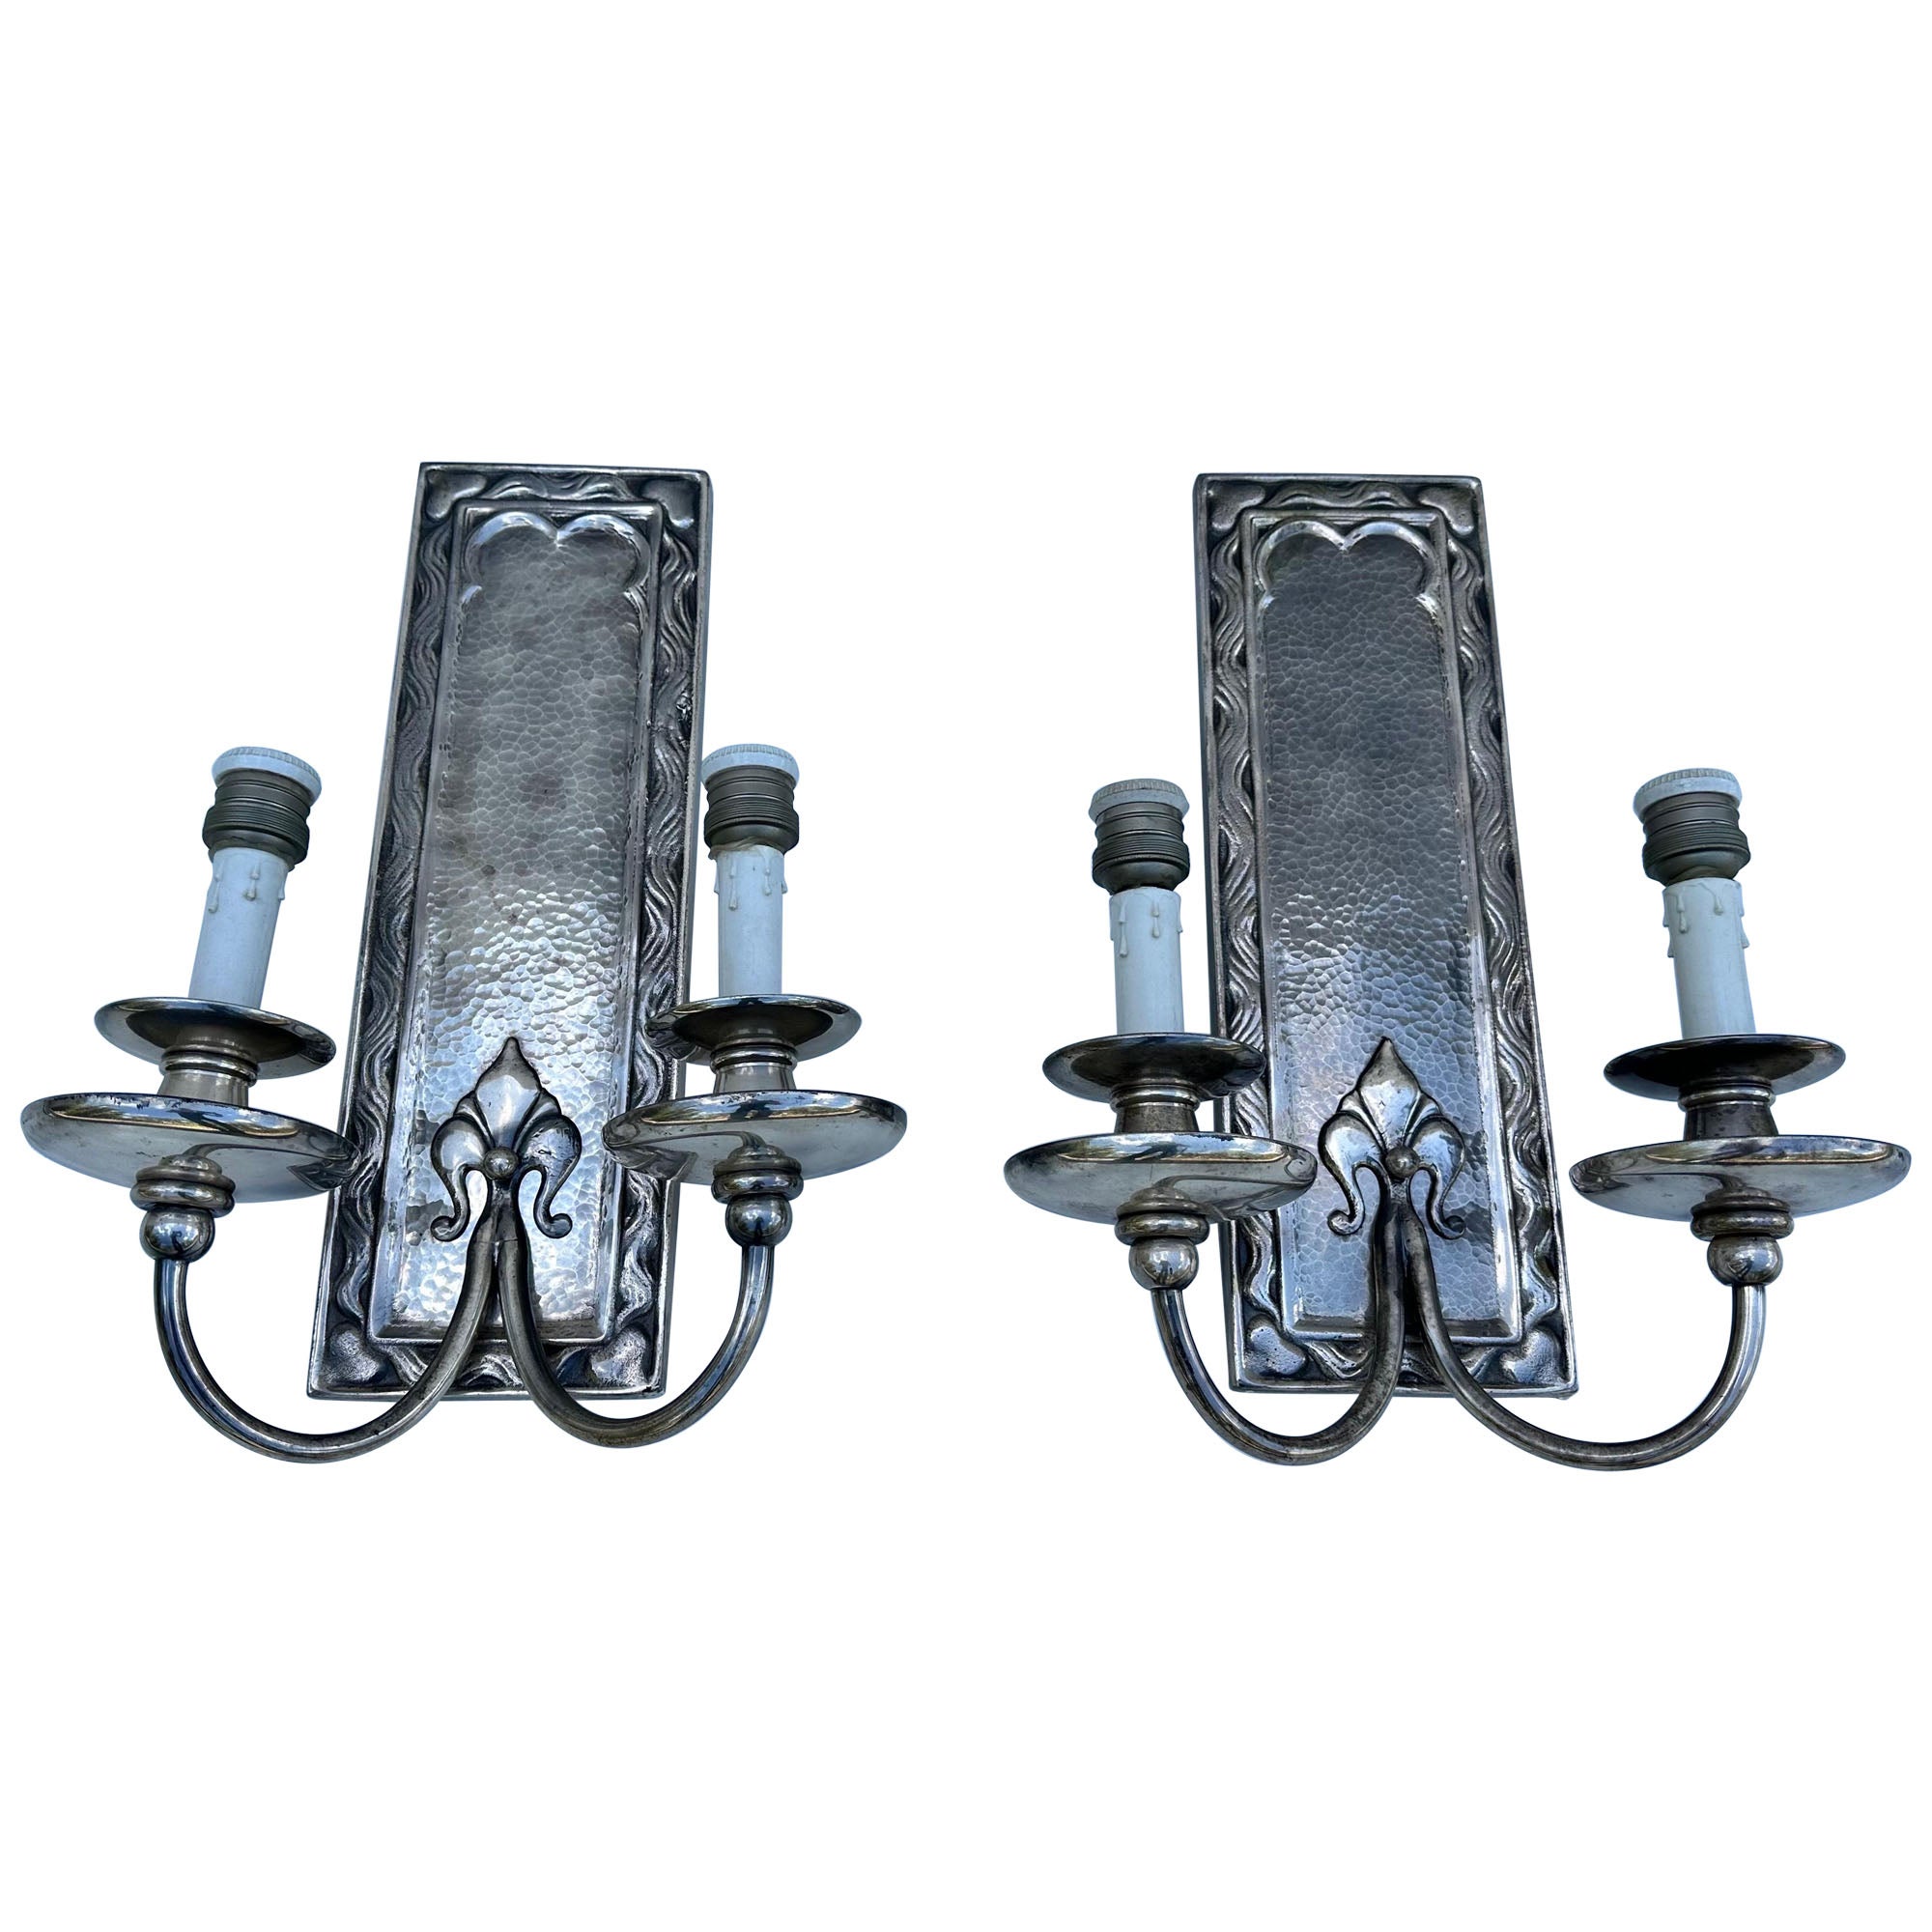 1960’s Neoclassical Nickel plated French Sconces, 2 pair available 